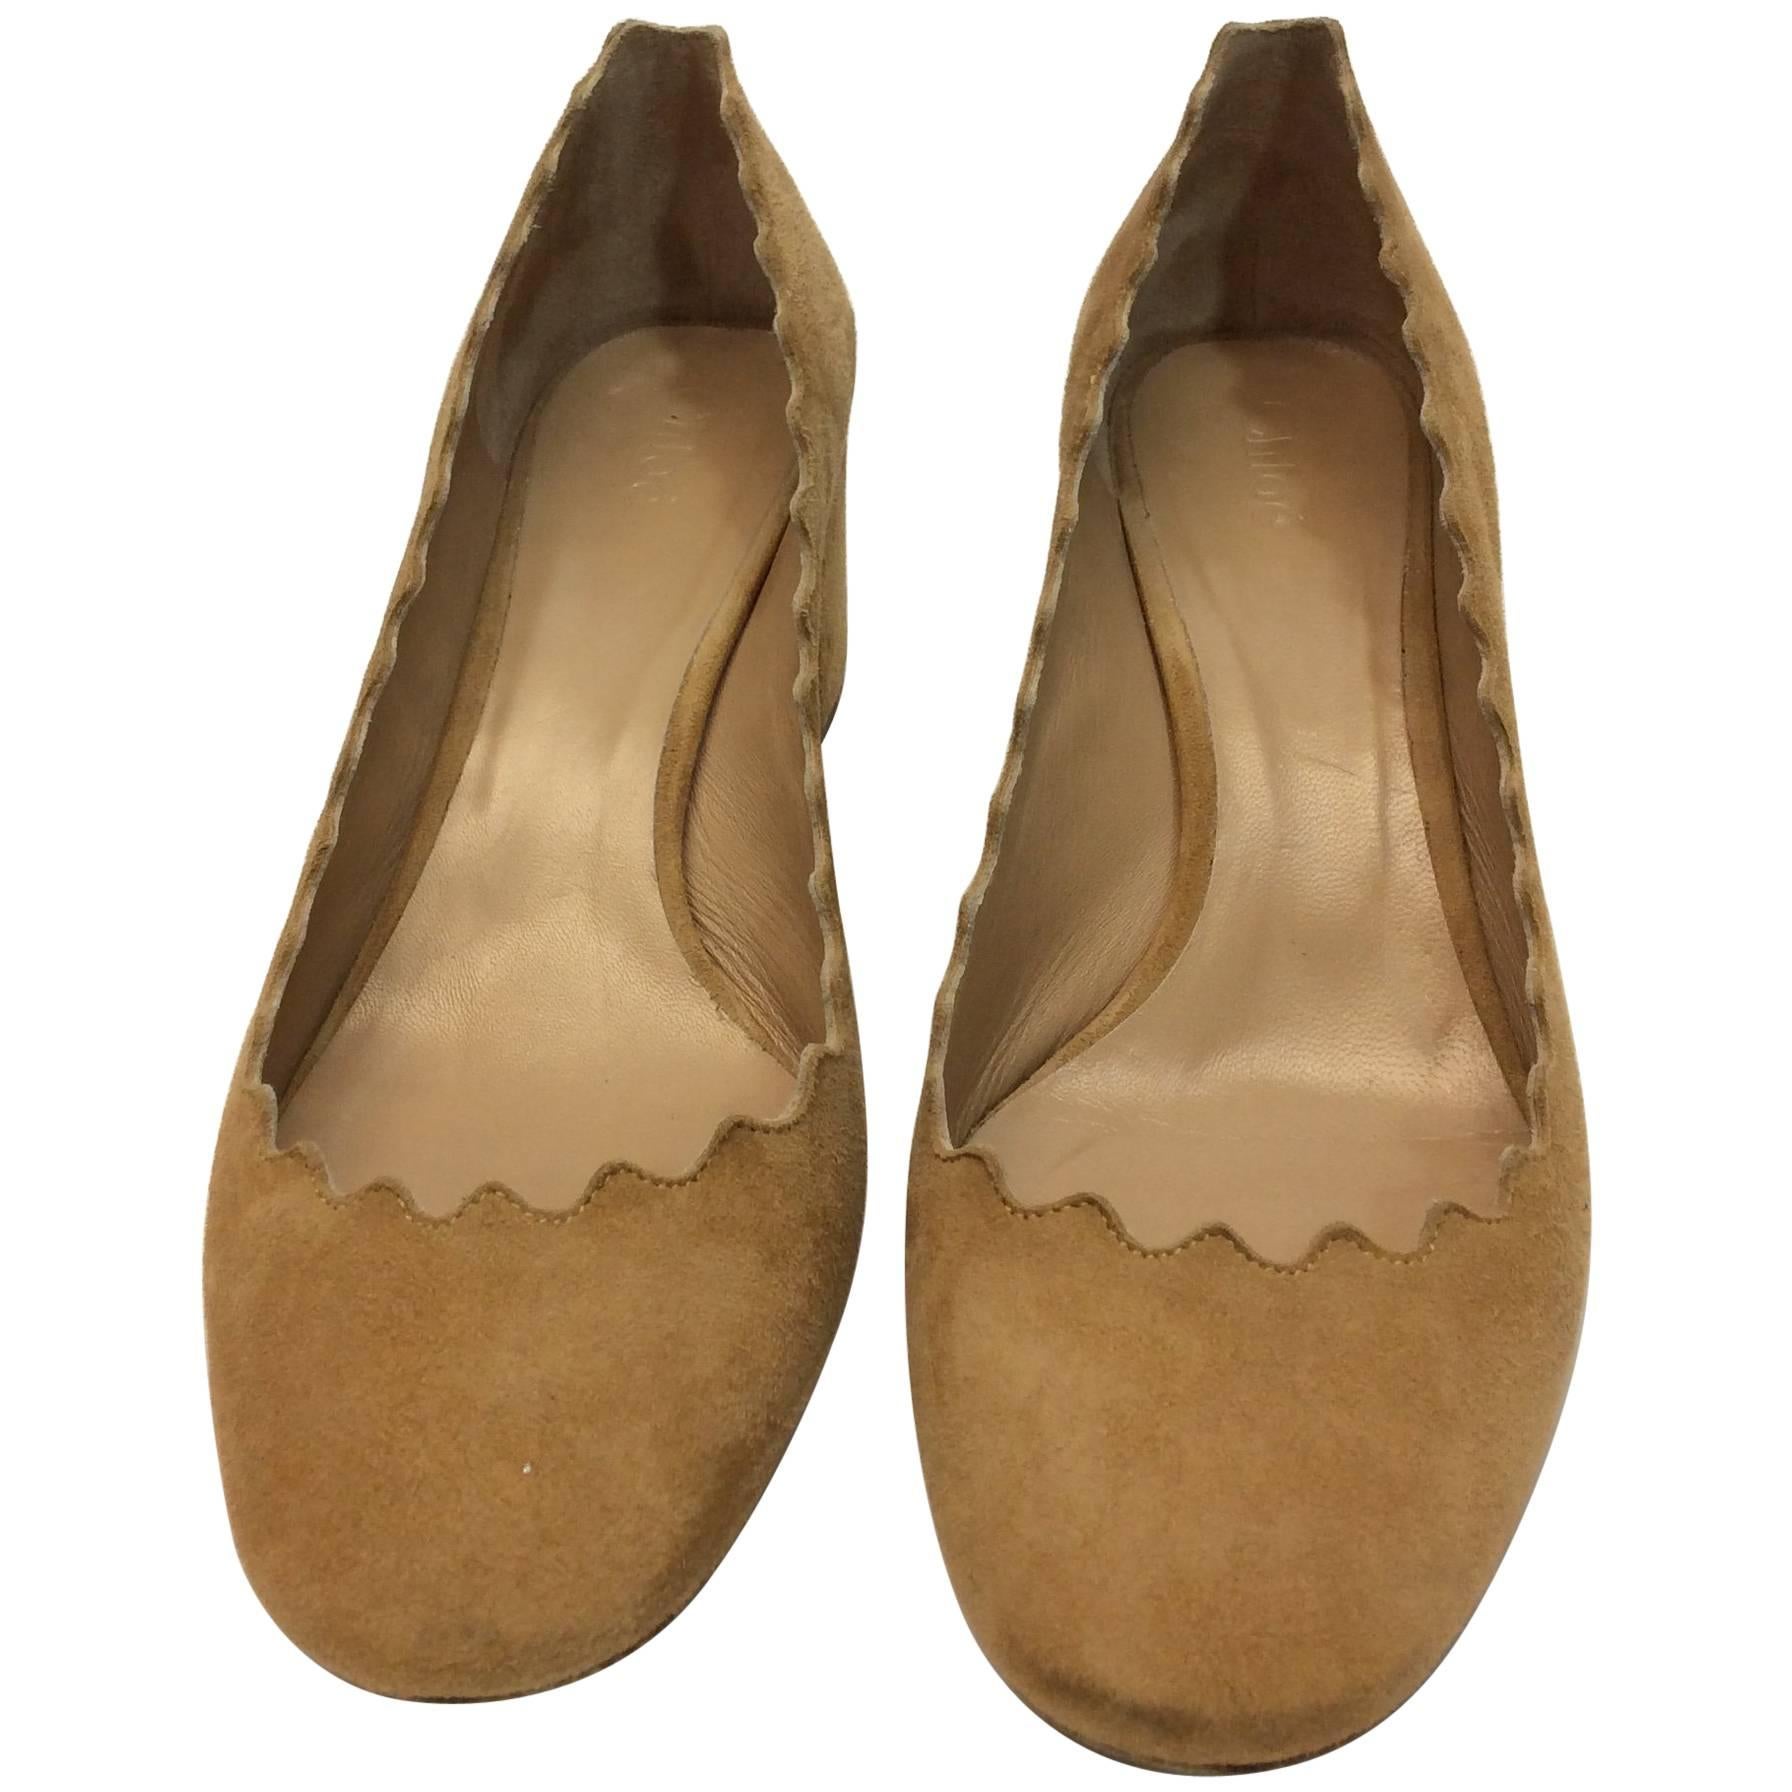 Chloe Suede Scalloped Heels For Sale